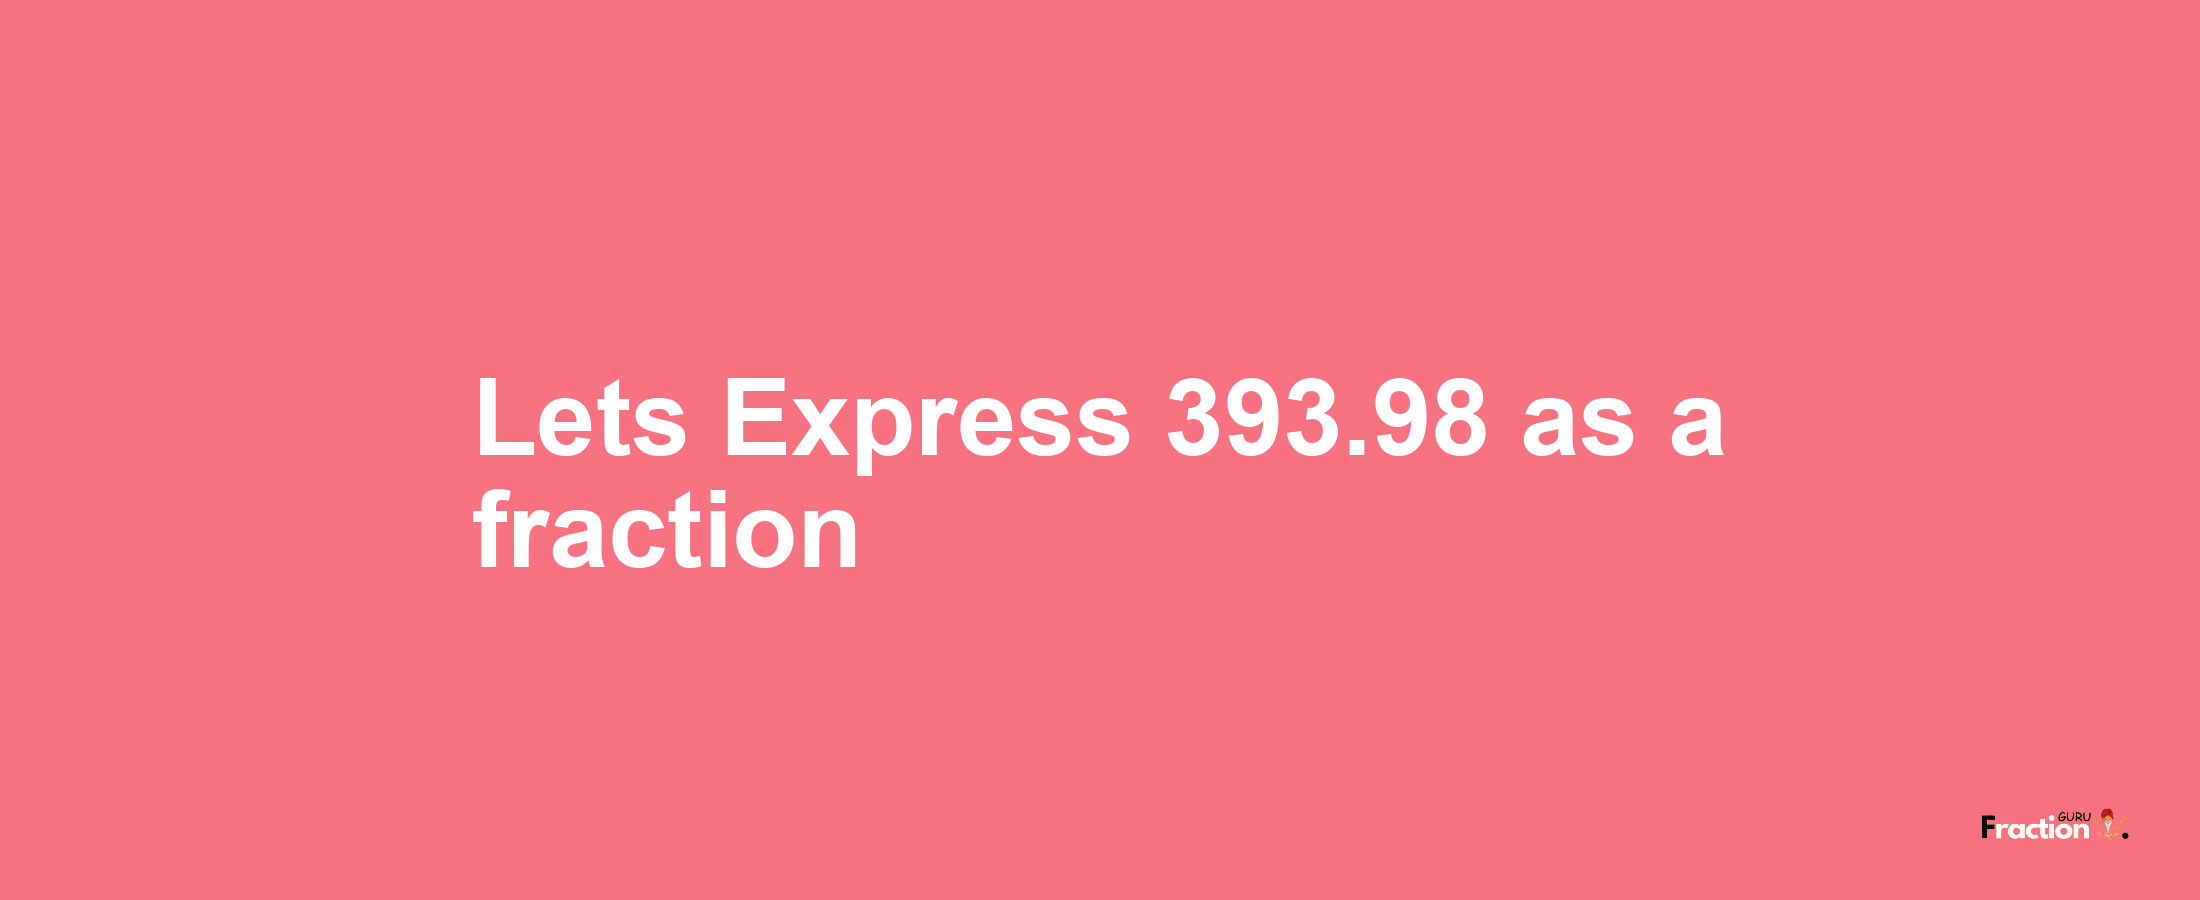 Lets Express 393.98 as afraction